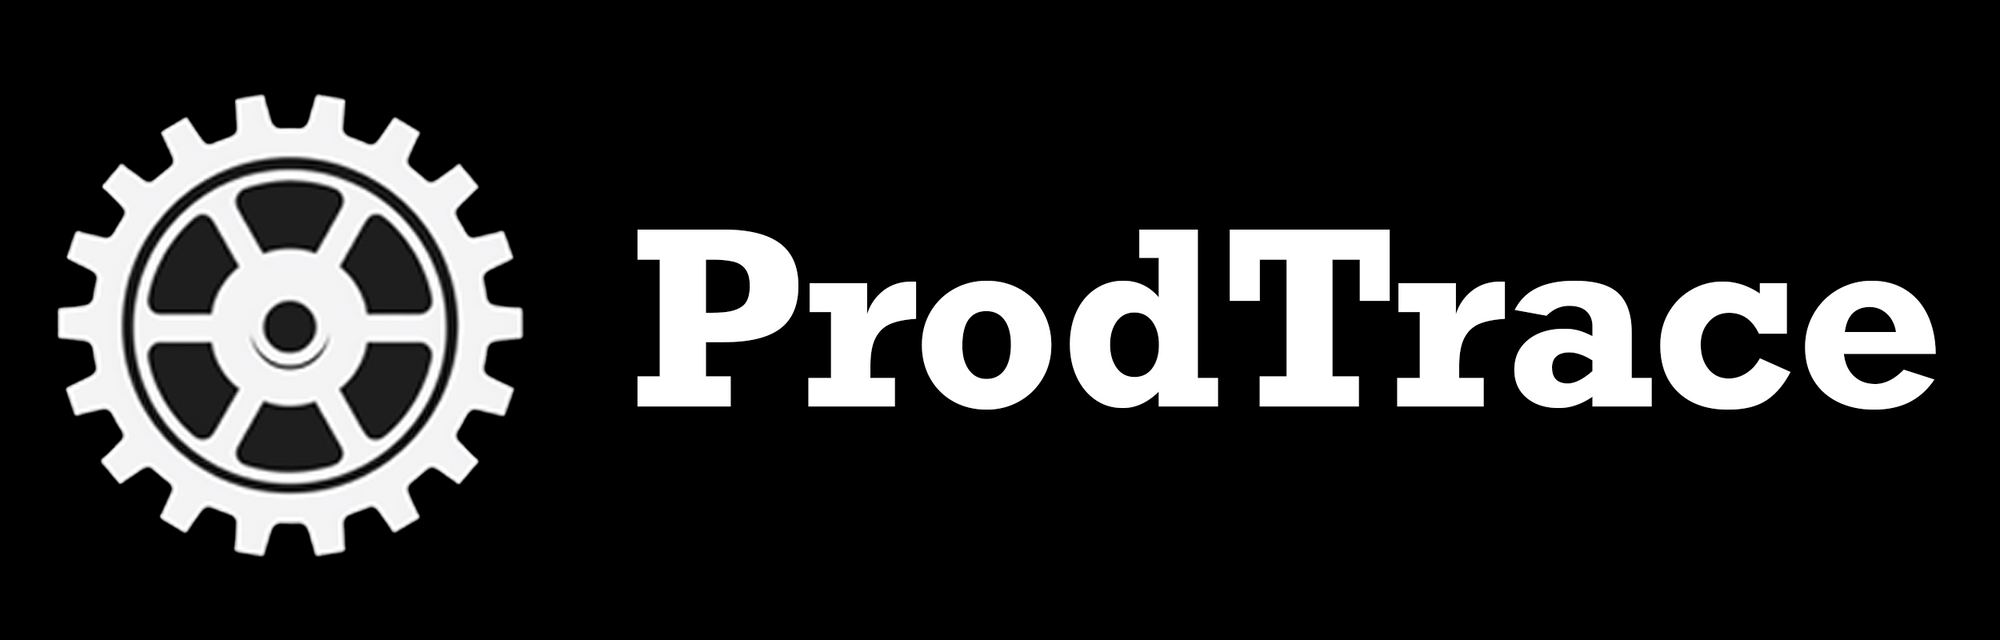 Introducing ProdTrace - Revolutionizing Supplier Management for Hardware Companies